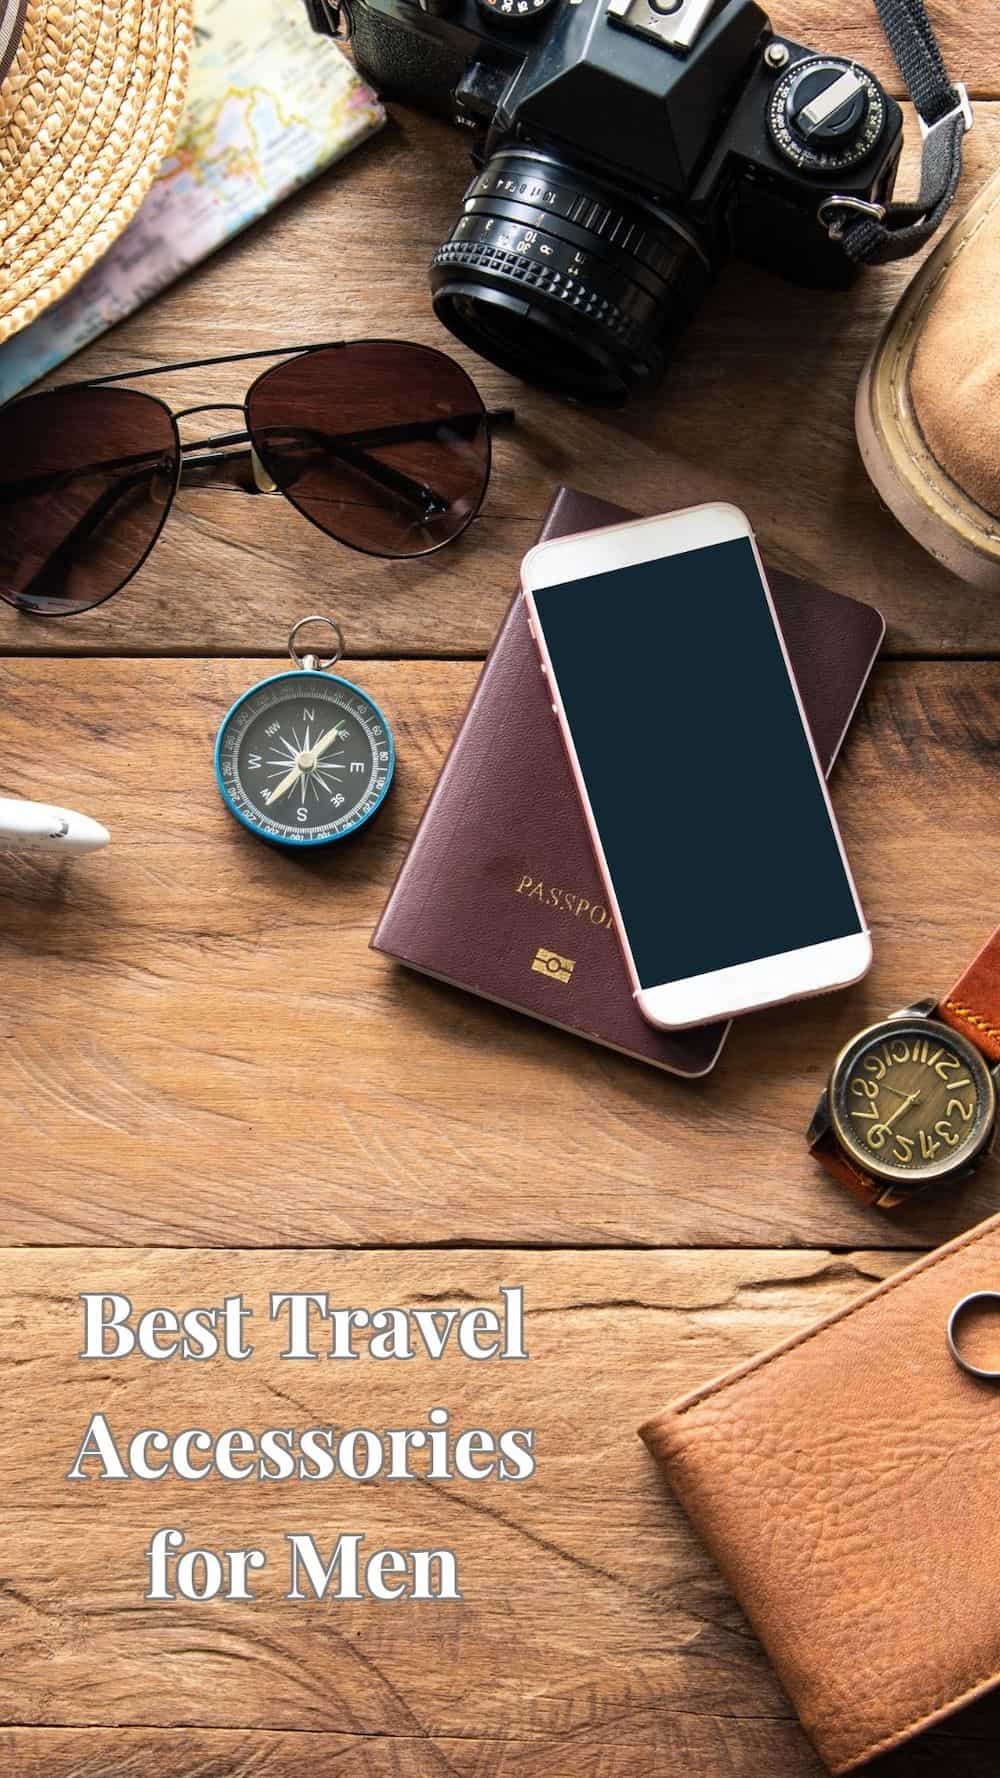 Best Travel Accessories for Men pin 